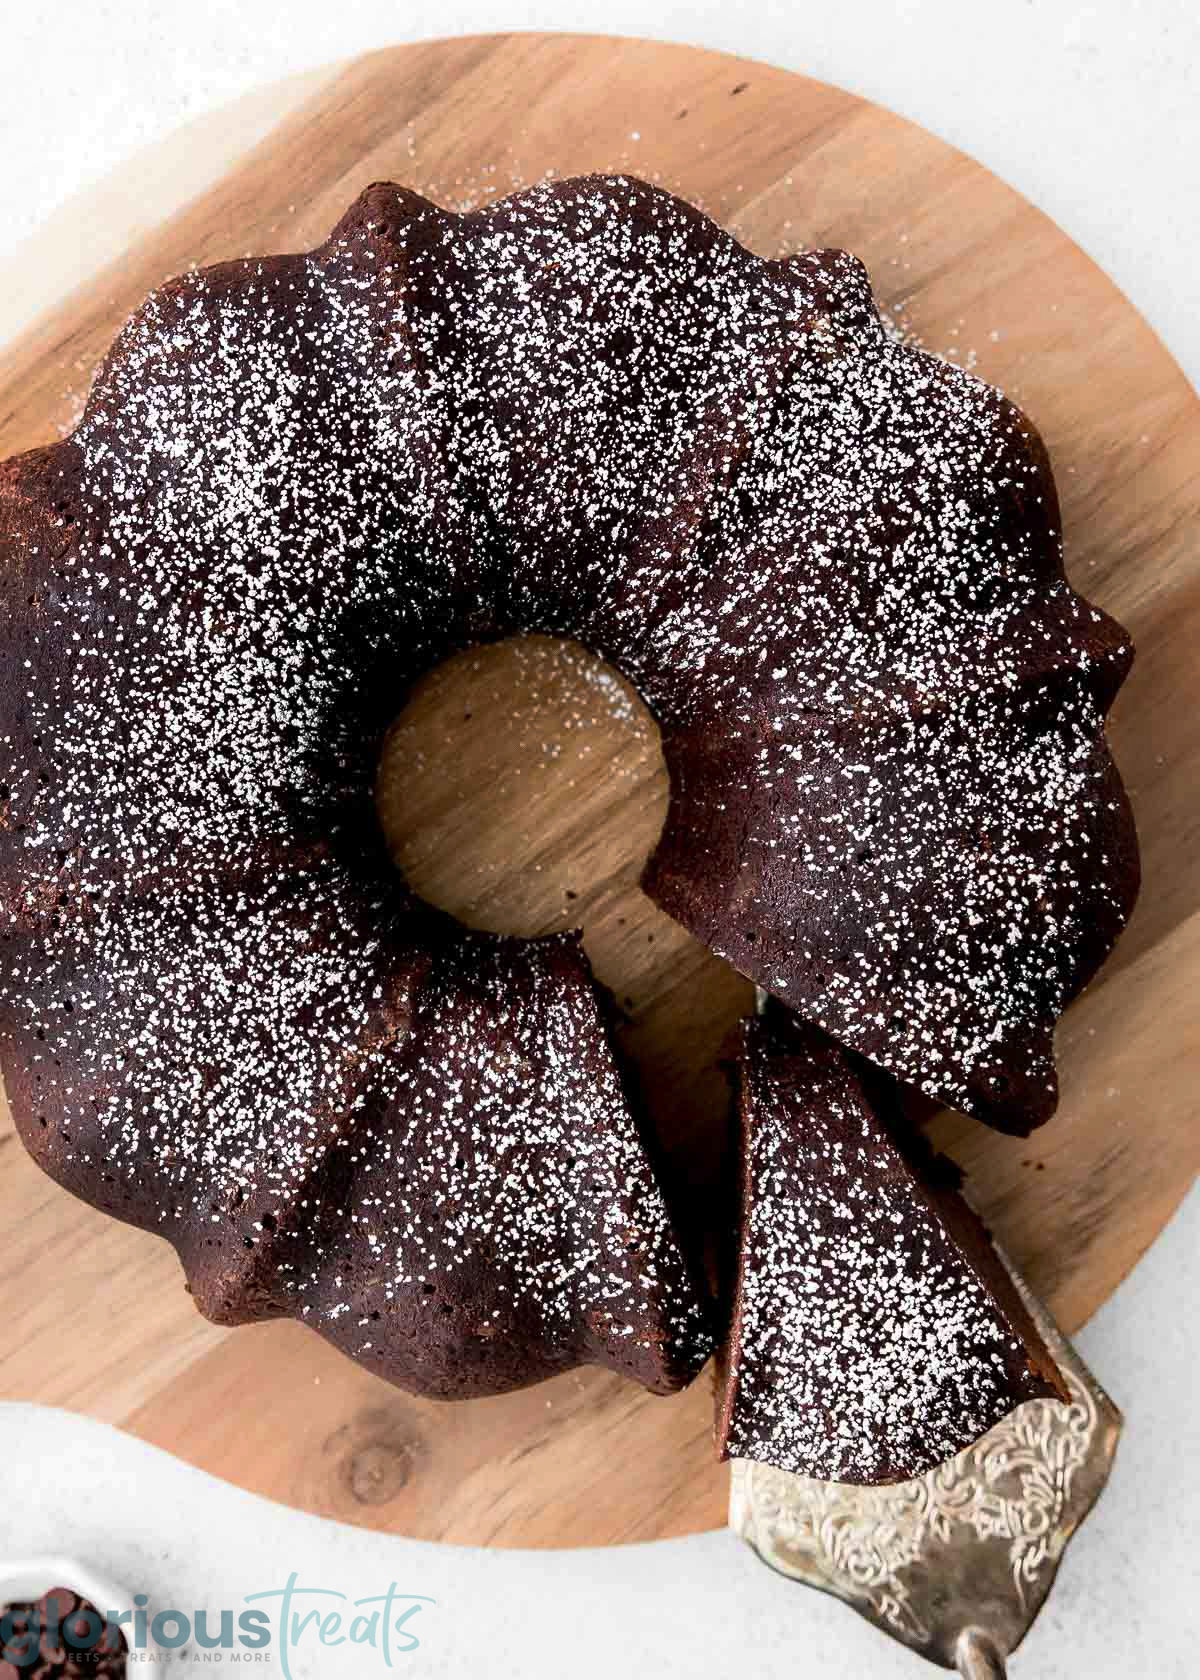 an overhead shot of chocolate bundt cake on a wooden cutting board. a spatula is removing a slice of cake.